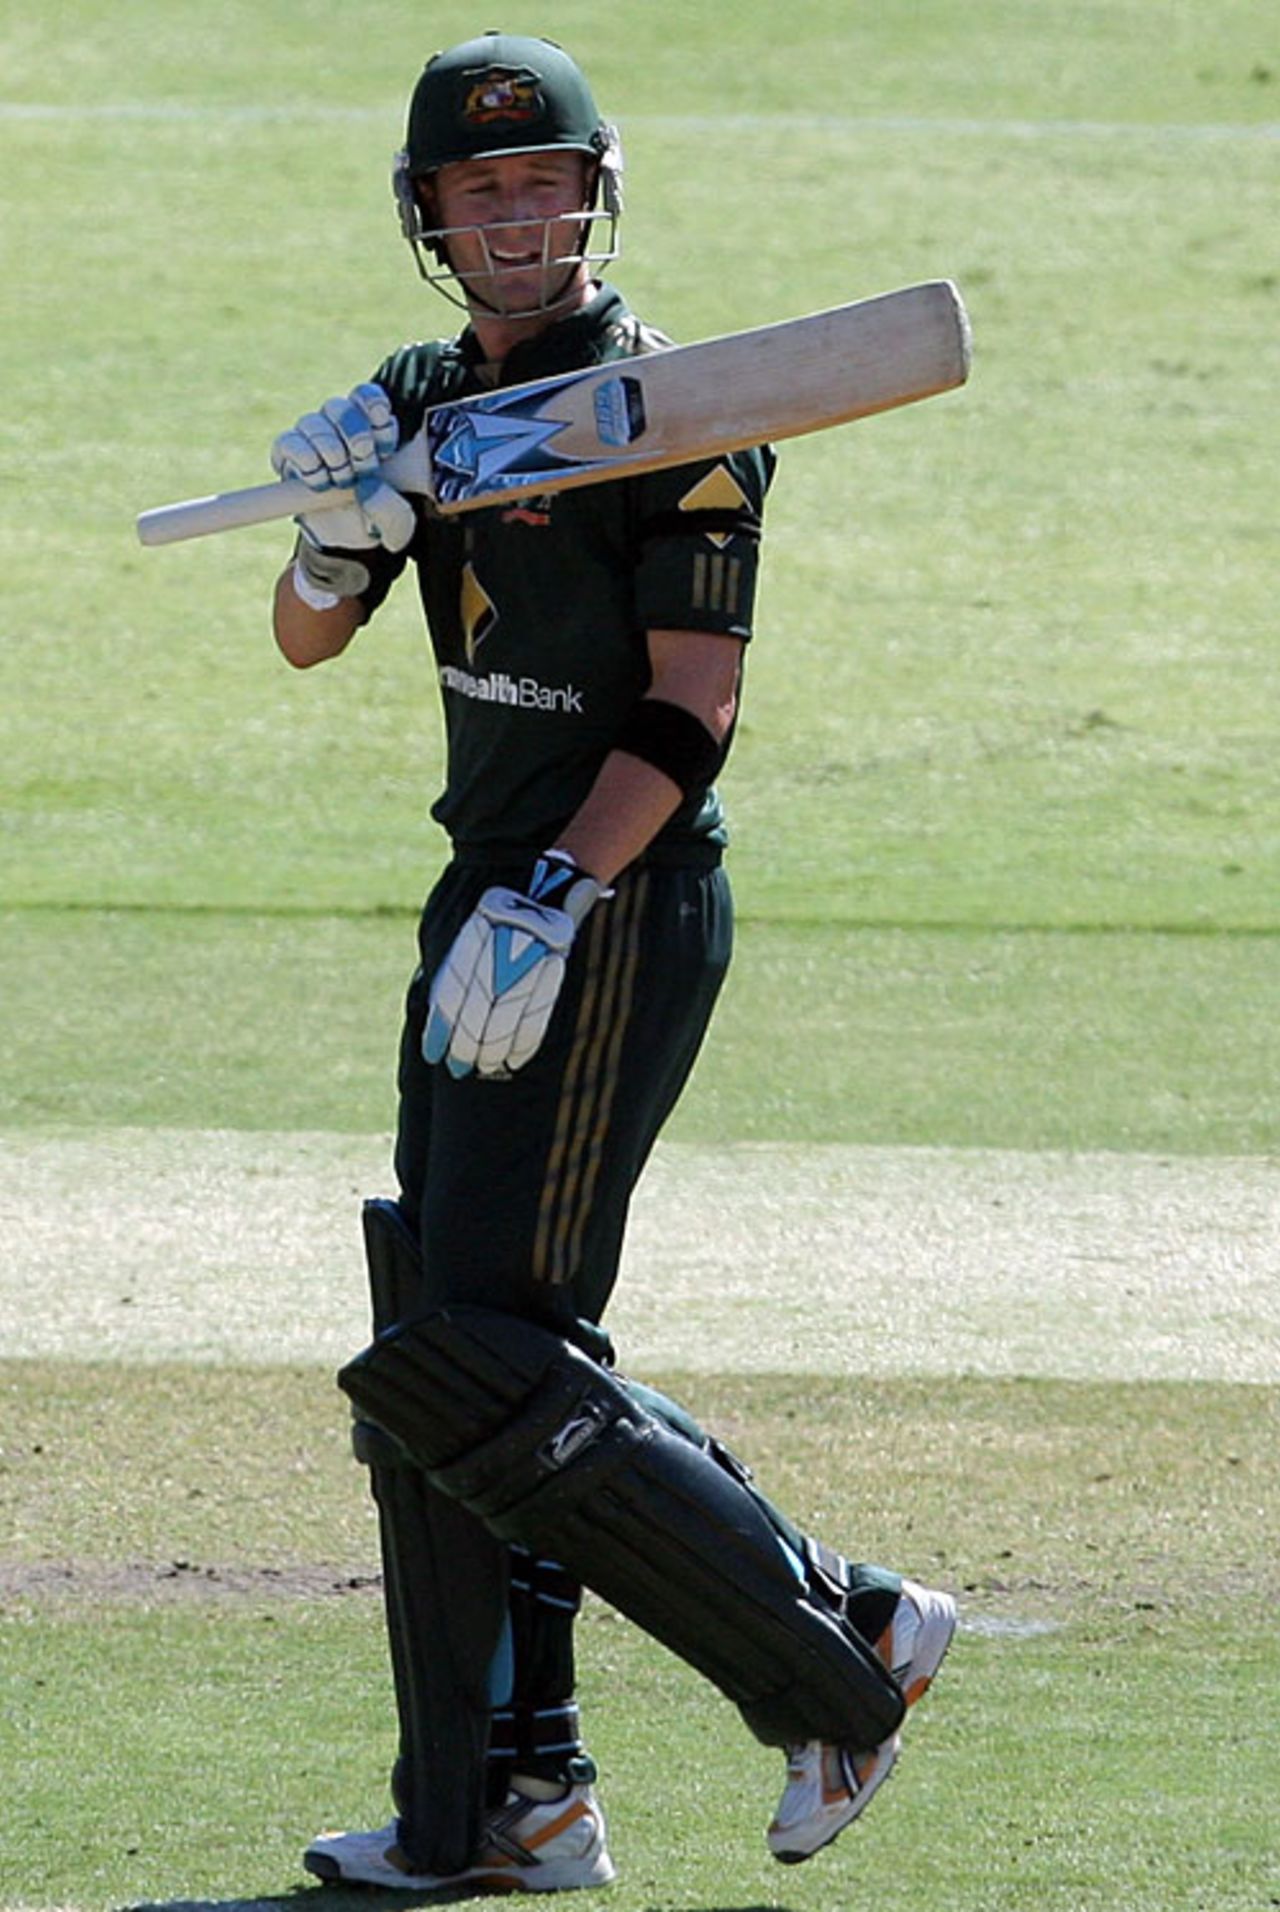 Michael Clarke raises the bat after getting his fifty, Australia v India, 7th match, CB Series, Adelaide, February 17, 2008